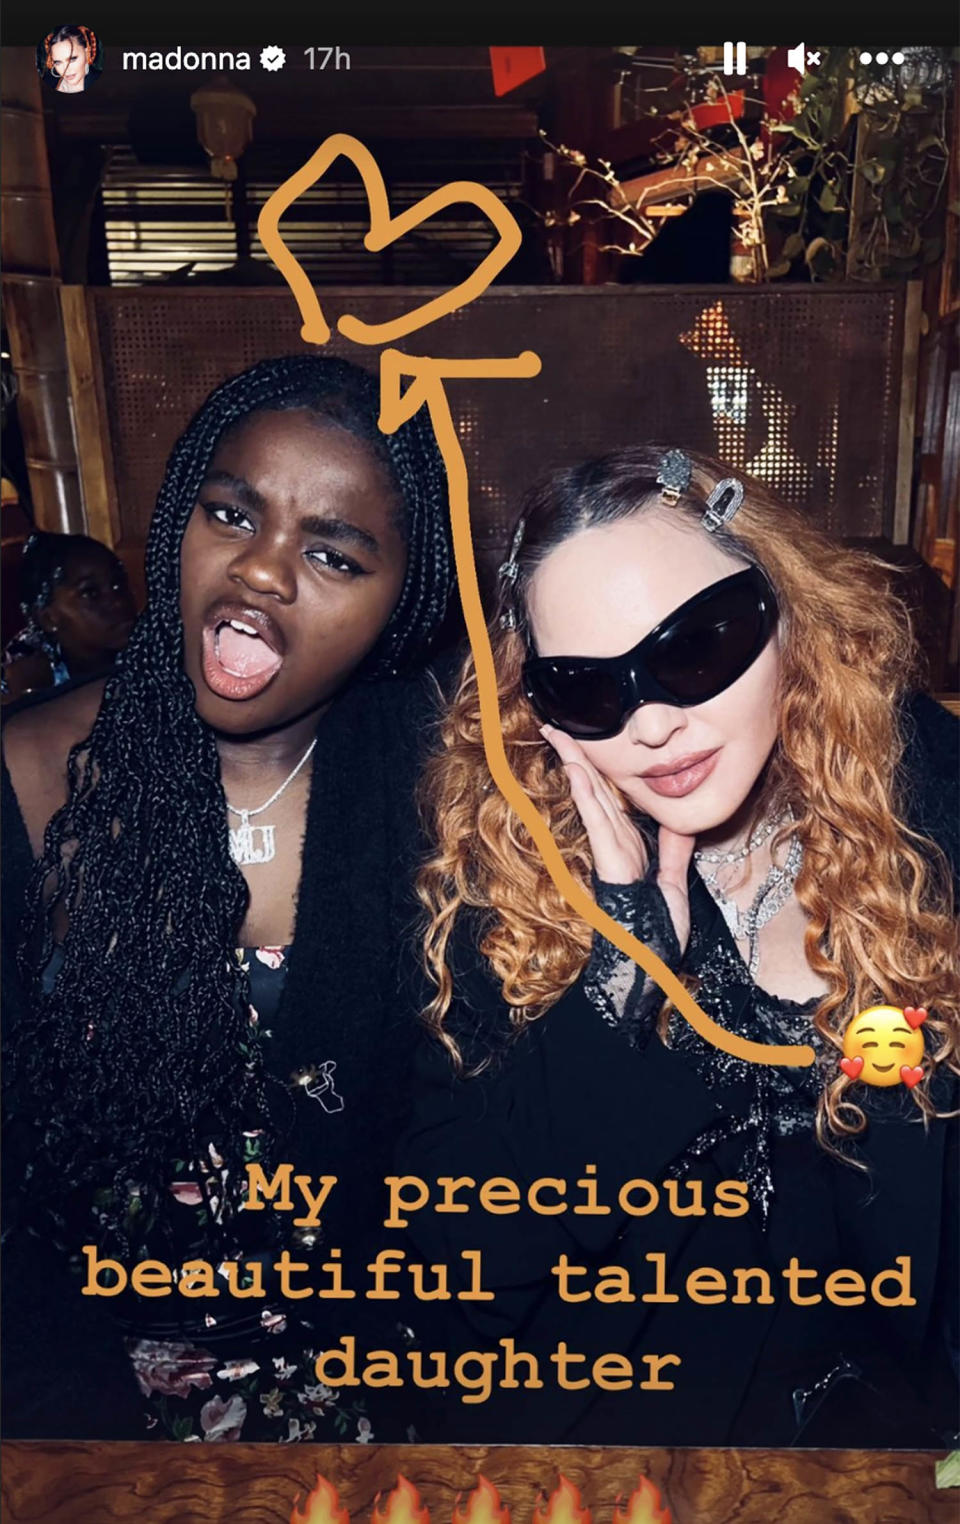 Madonna shares a sweet picture with her daughter Mercy James. (@madonna via Instagram)